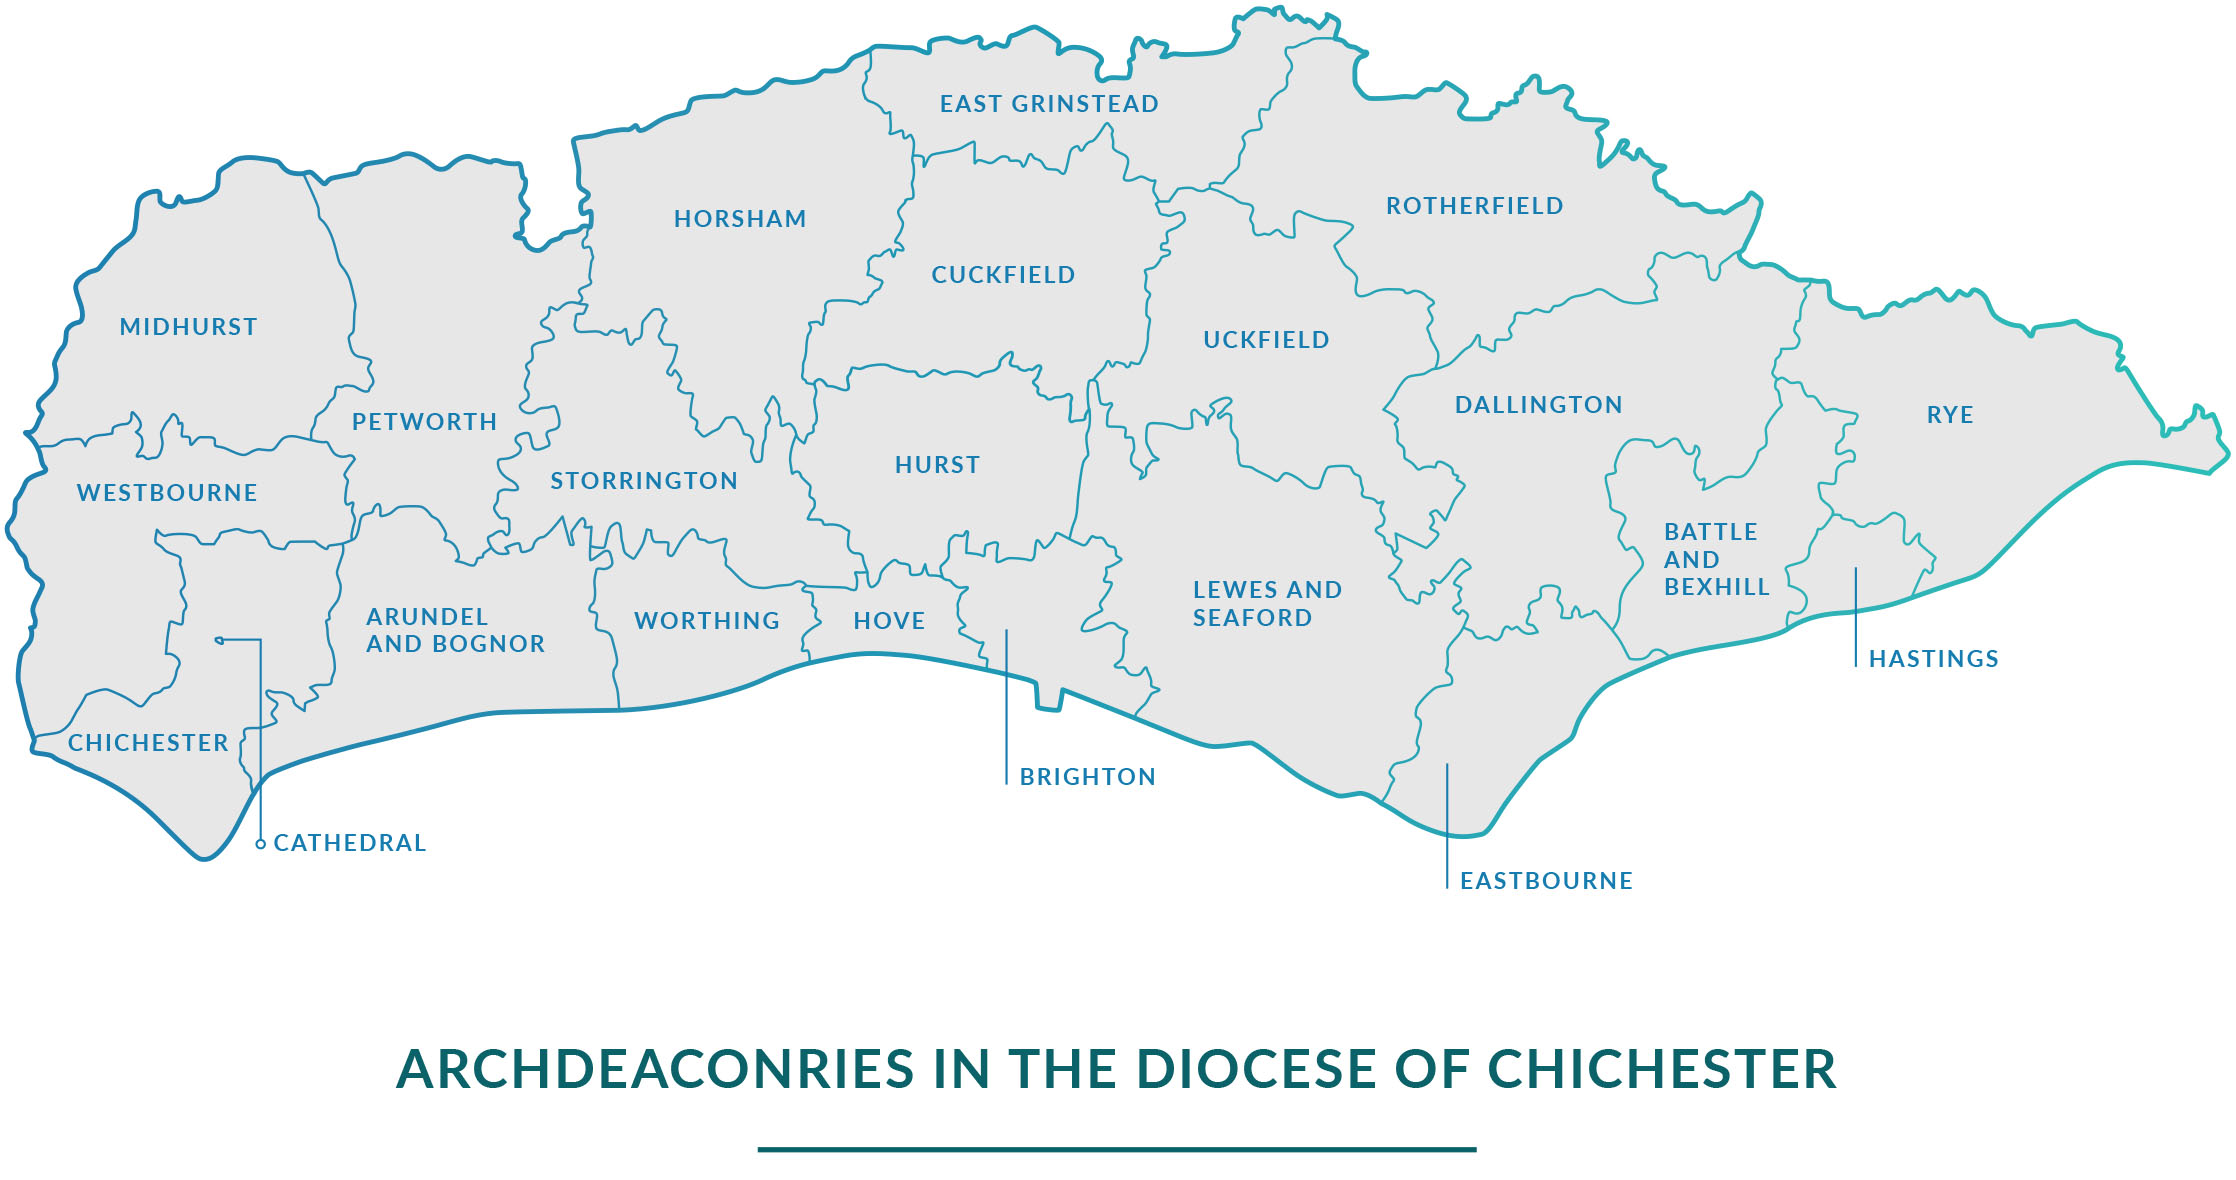 Archdeaconries in the diocese of Chichester